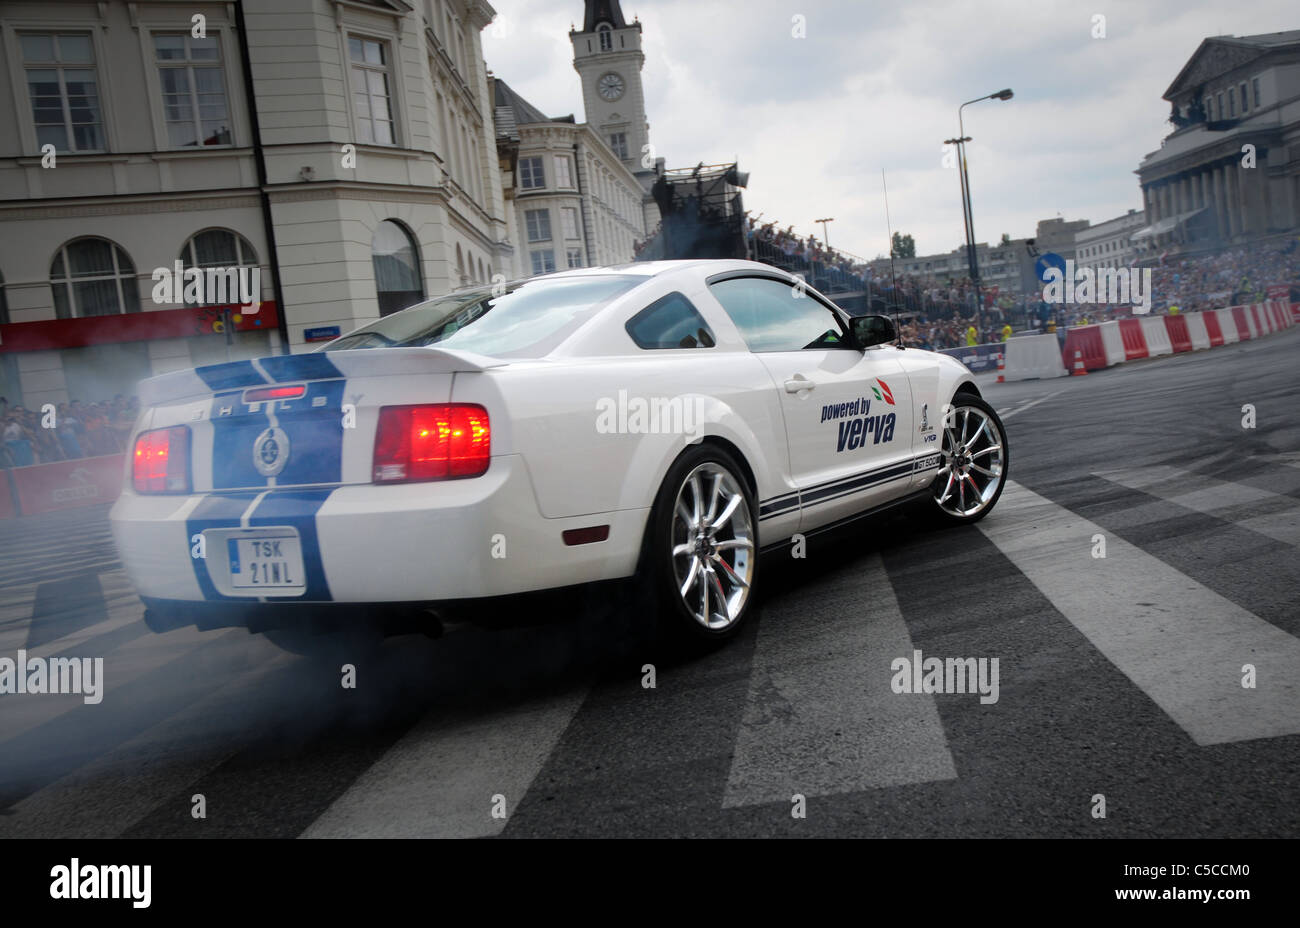 18.06.2011 Ford Mustang GT 500 Shelby car during VERVA Street Racing Show in Warsaw, Poland Stock Photo